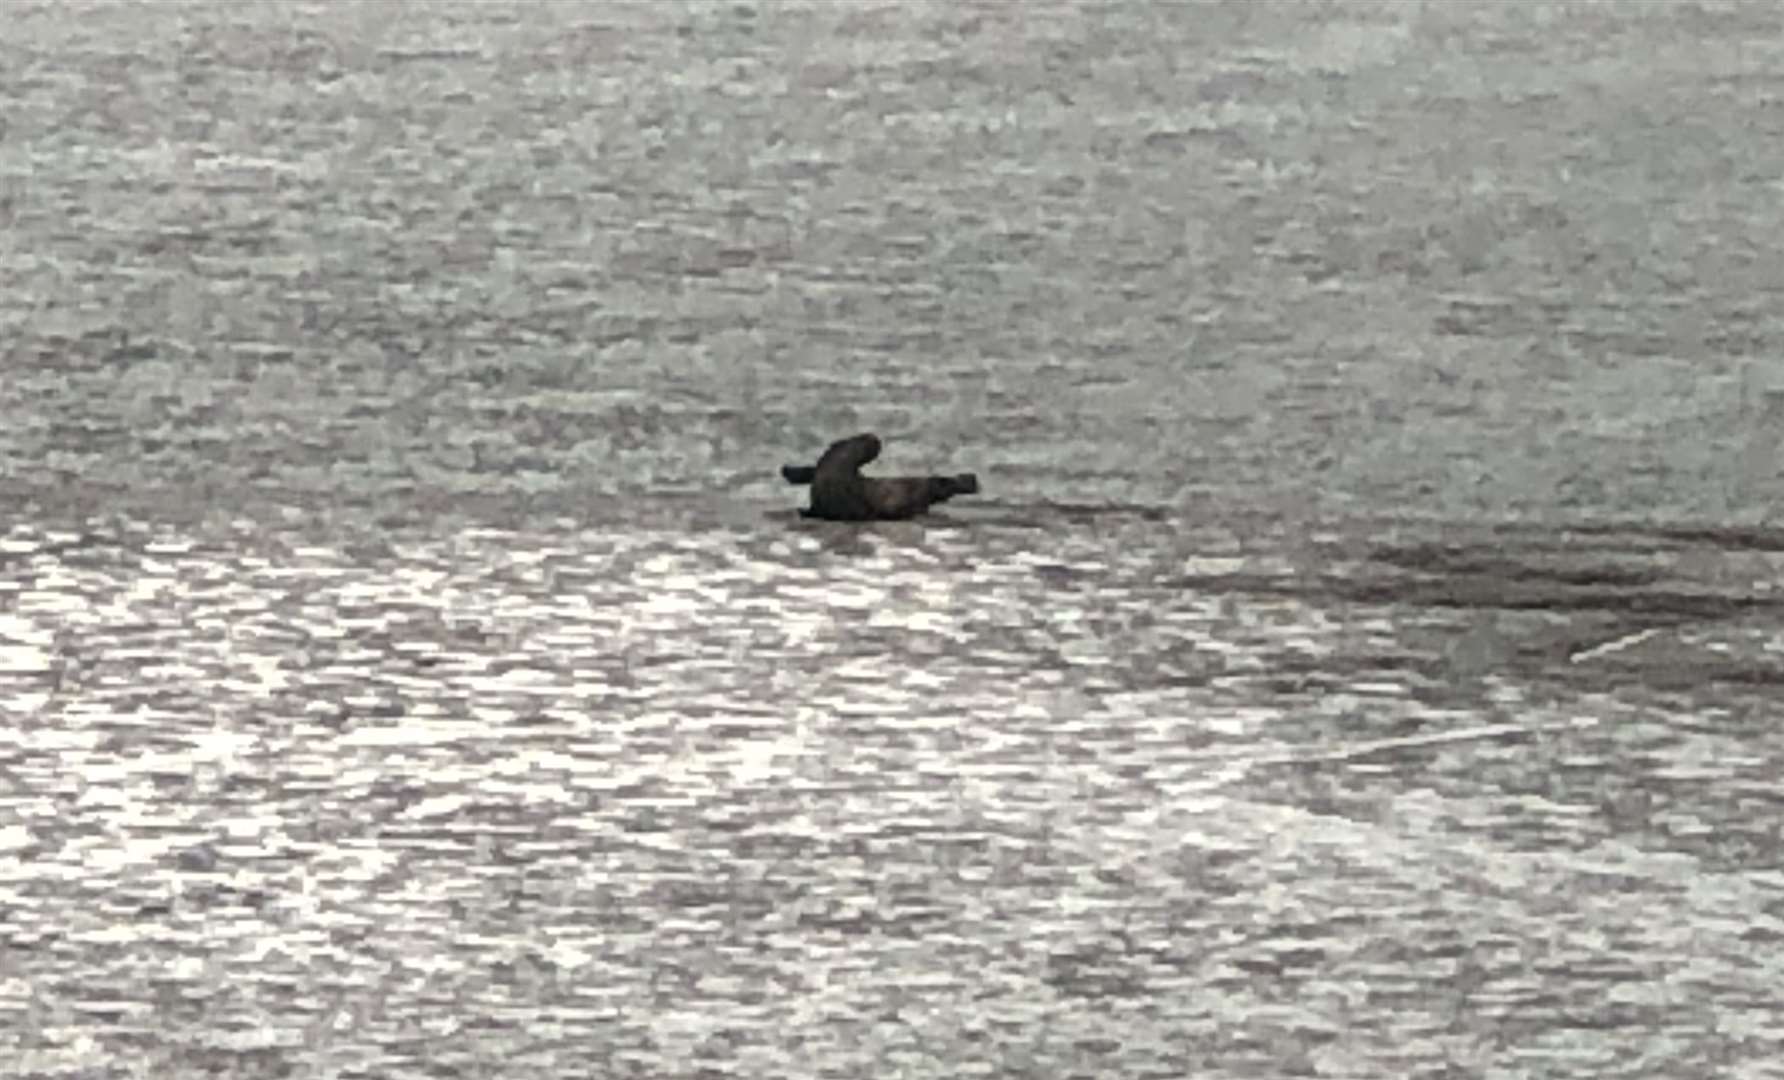 Seal was spotted by Nuffield Health gym